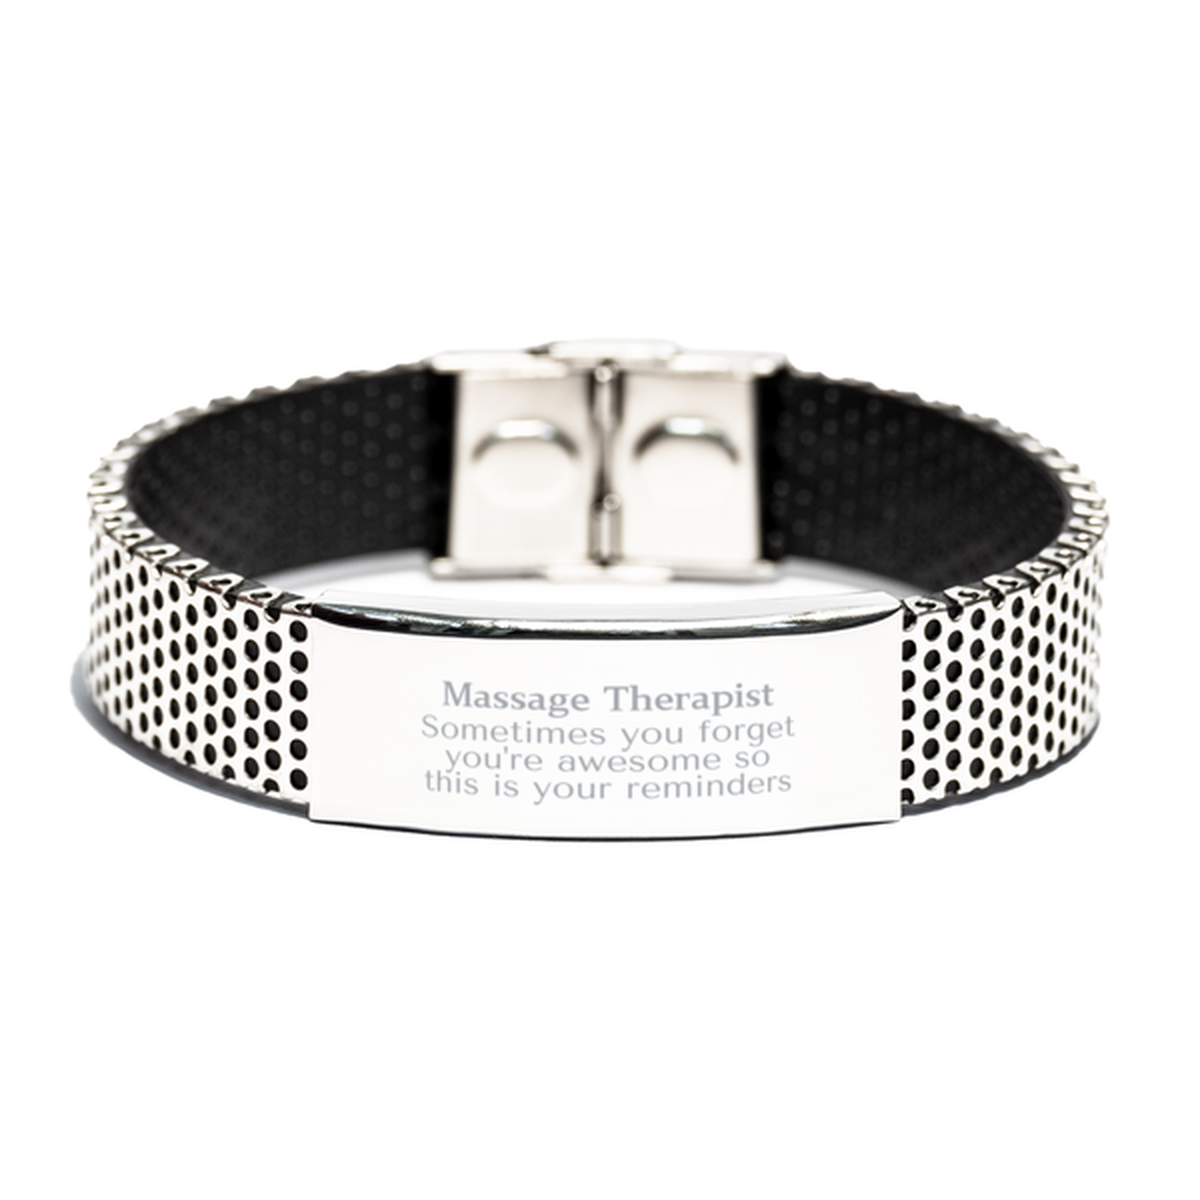 Sentimental Massage Therapist Stainless Steel Bracelet, Massage Therapist Sometimes you forget you're awesome so this is your reminders, Graduation Christmas Birthday Gifts for Massage Therapist, Men, Women, Coworkers